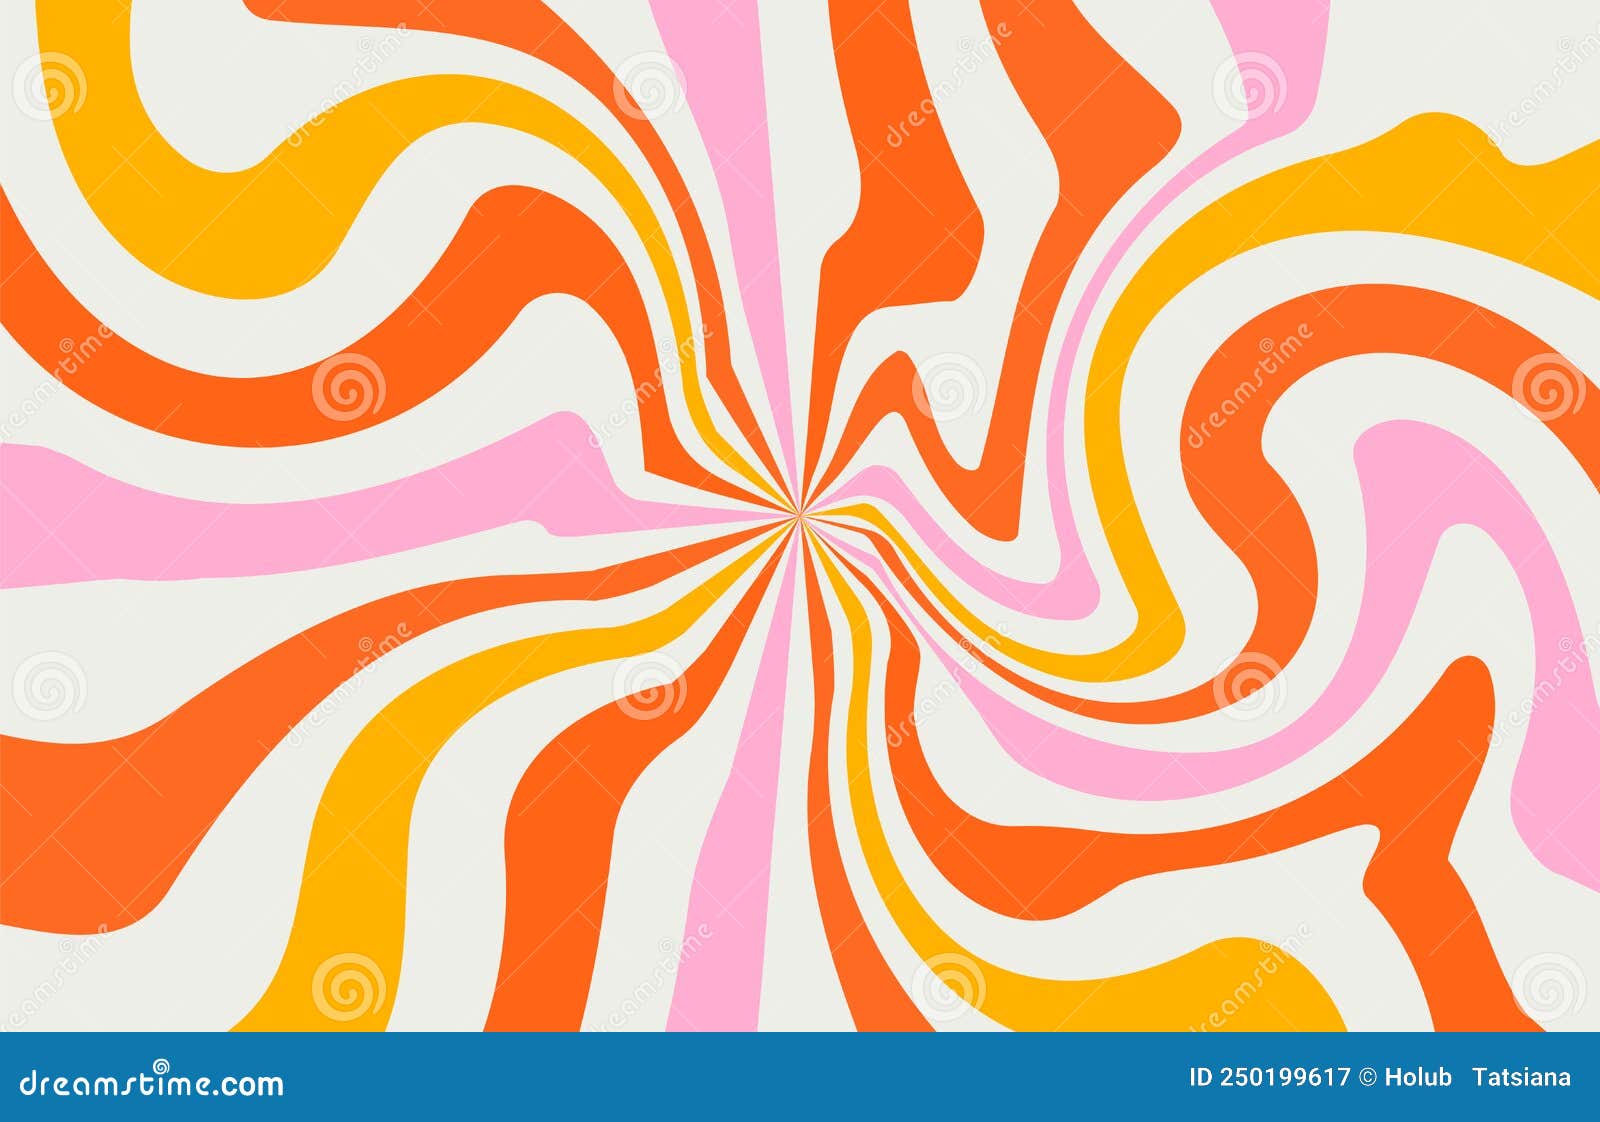 Acid Wave Rainbow Line Backgrounds in 1970s 1960s Hippie Style. Carnival  Wallpaper Patterns Retro Vintage 70s 60s Groove Stock Vector - Illustration  of design, color: 250199617